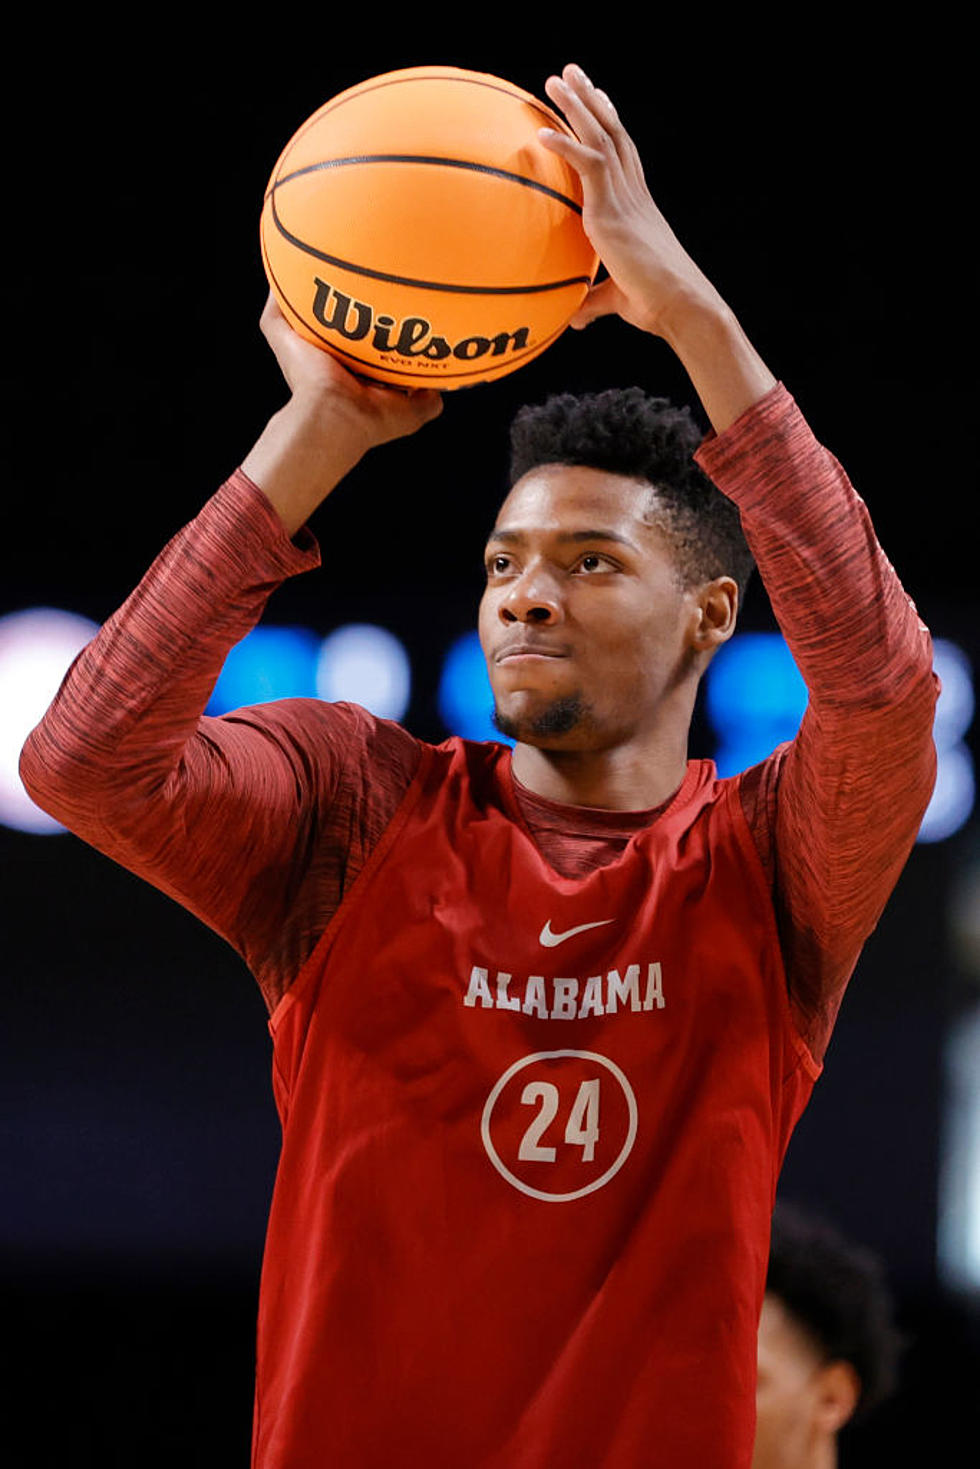 Did Oversized Balls Lead To Alabama&apos;s Tourney Loss In Louisville?